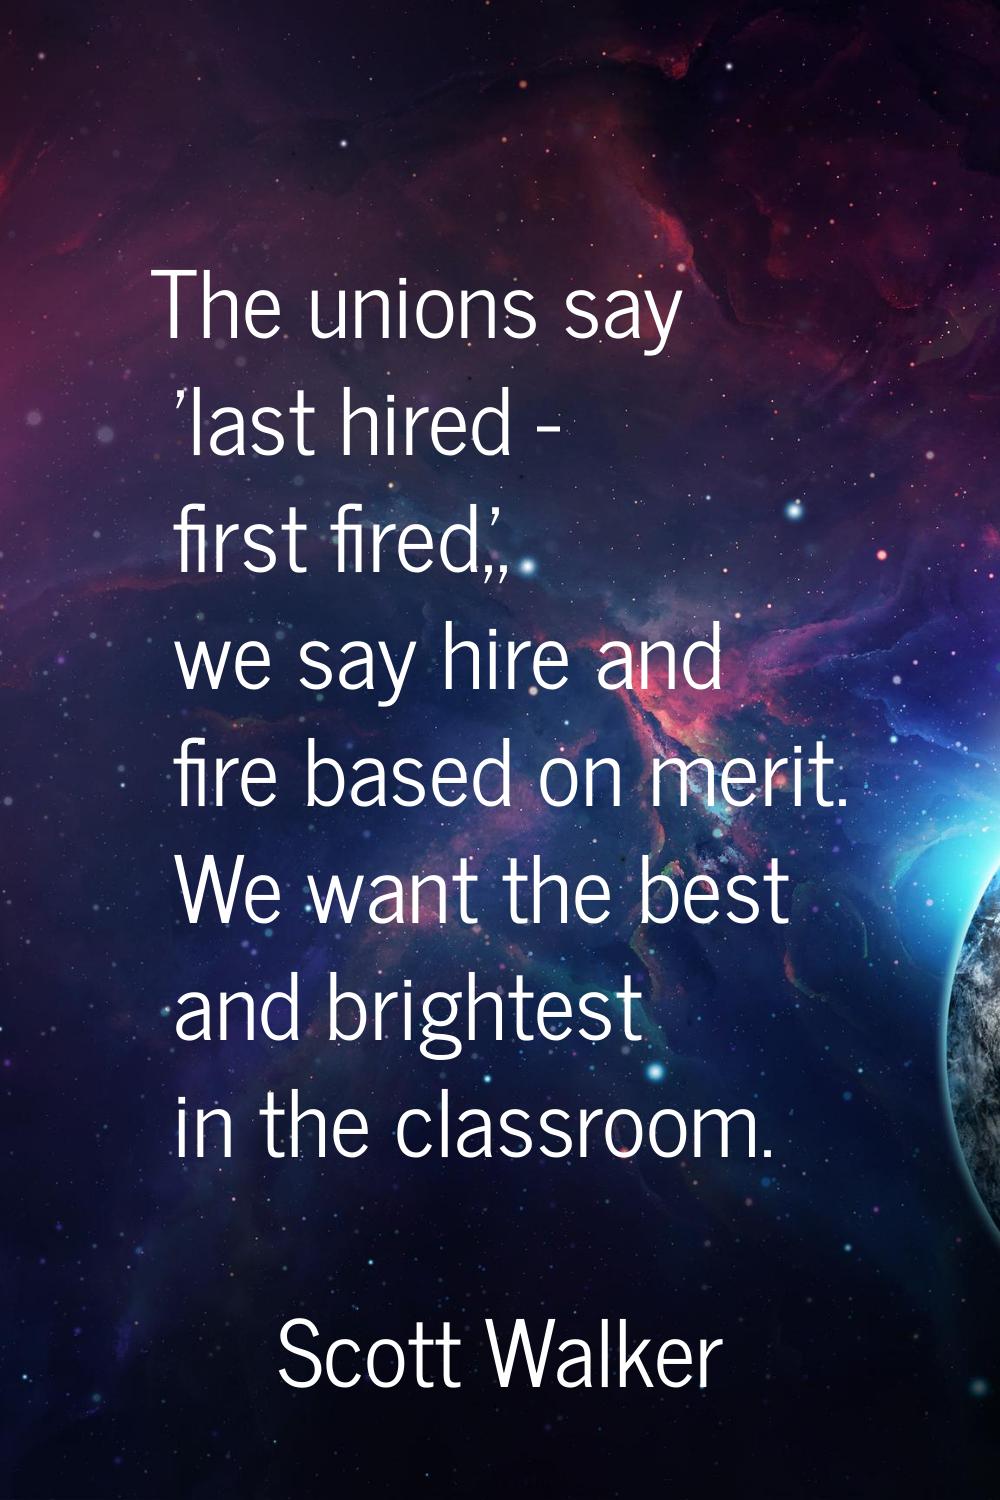 The unions say 'last hired - first fired,', we say hire and fire based on merit. We want the best a